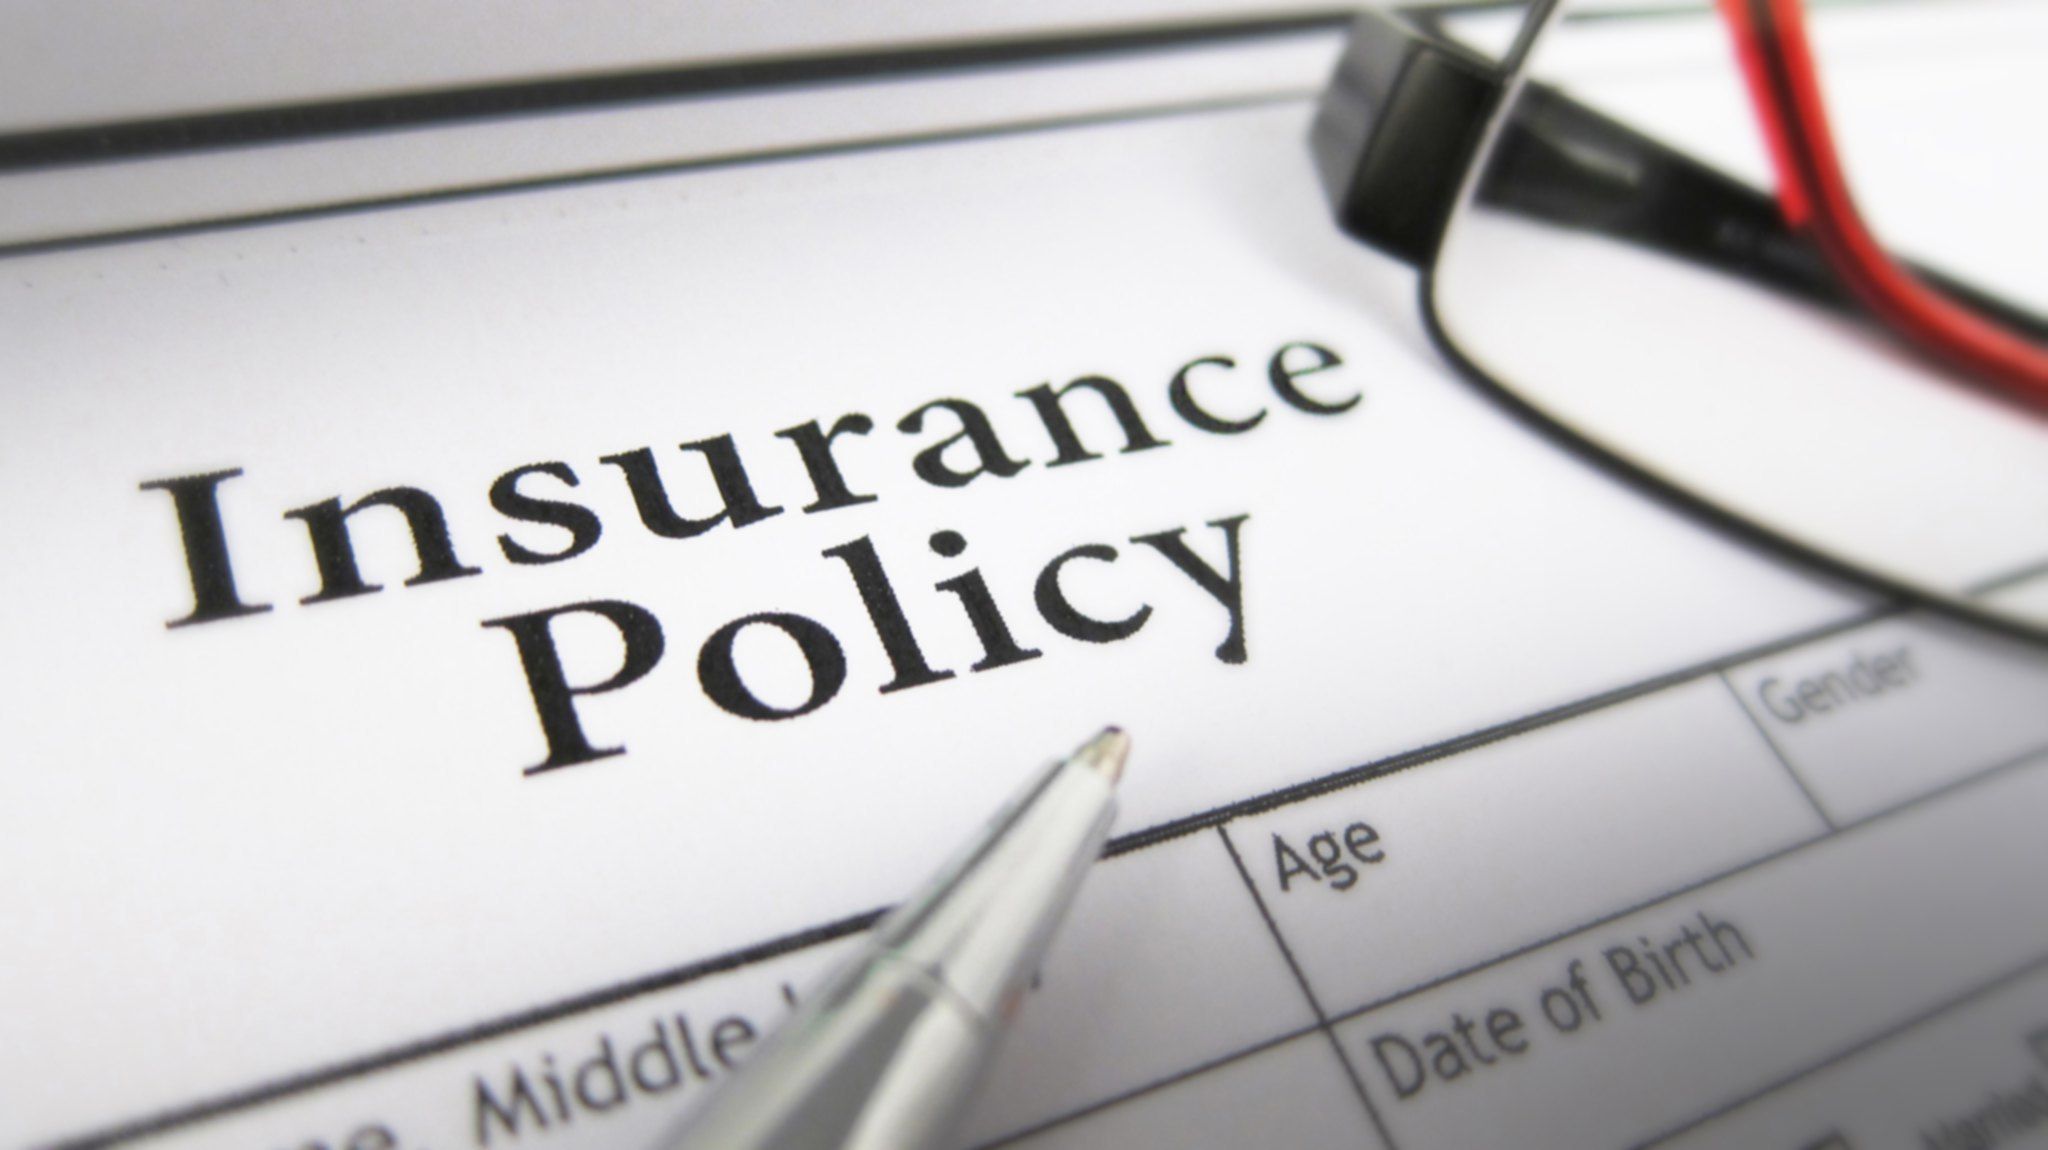 Insurance Policy on a paper with pen